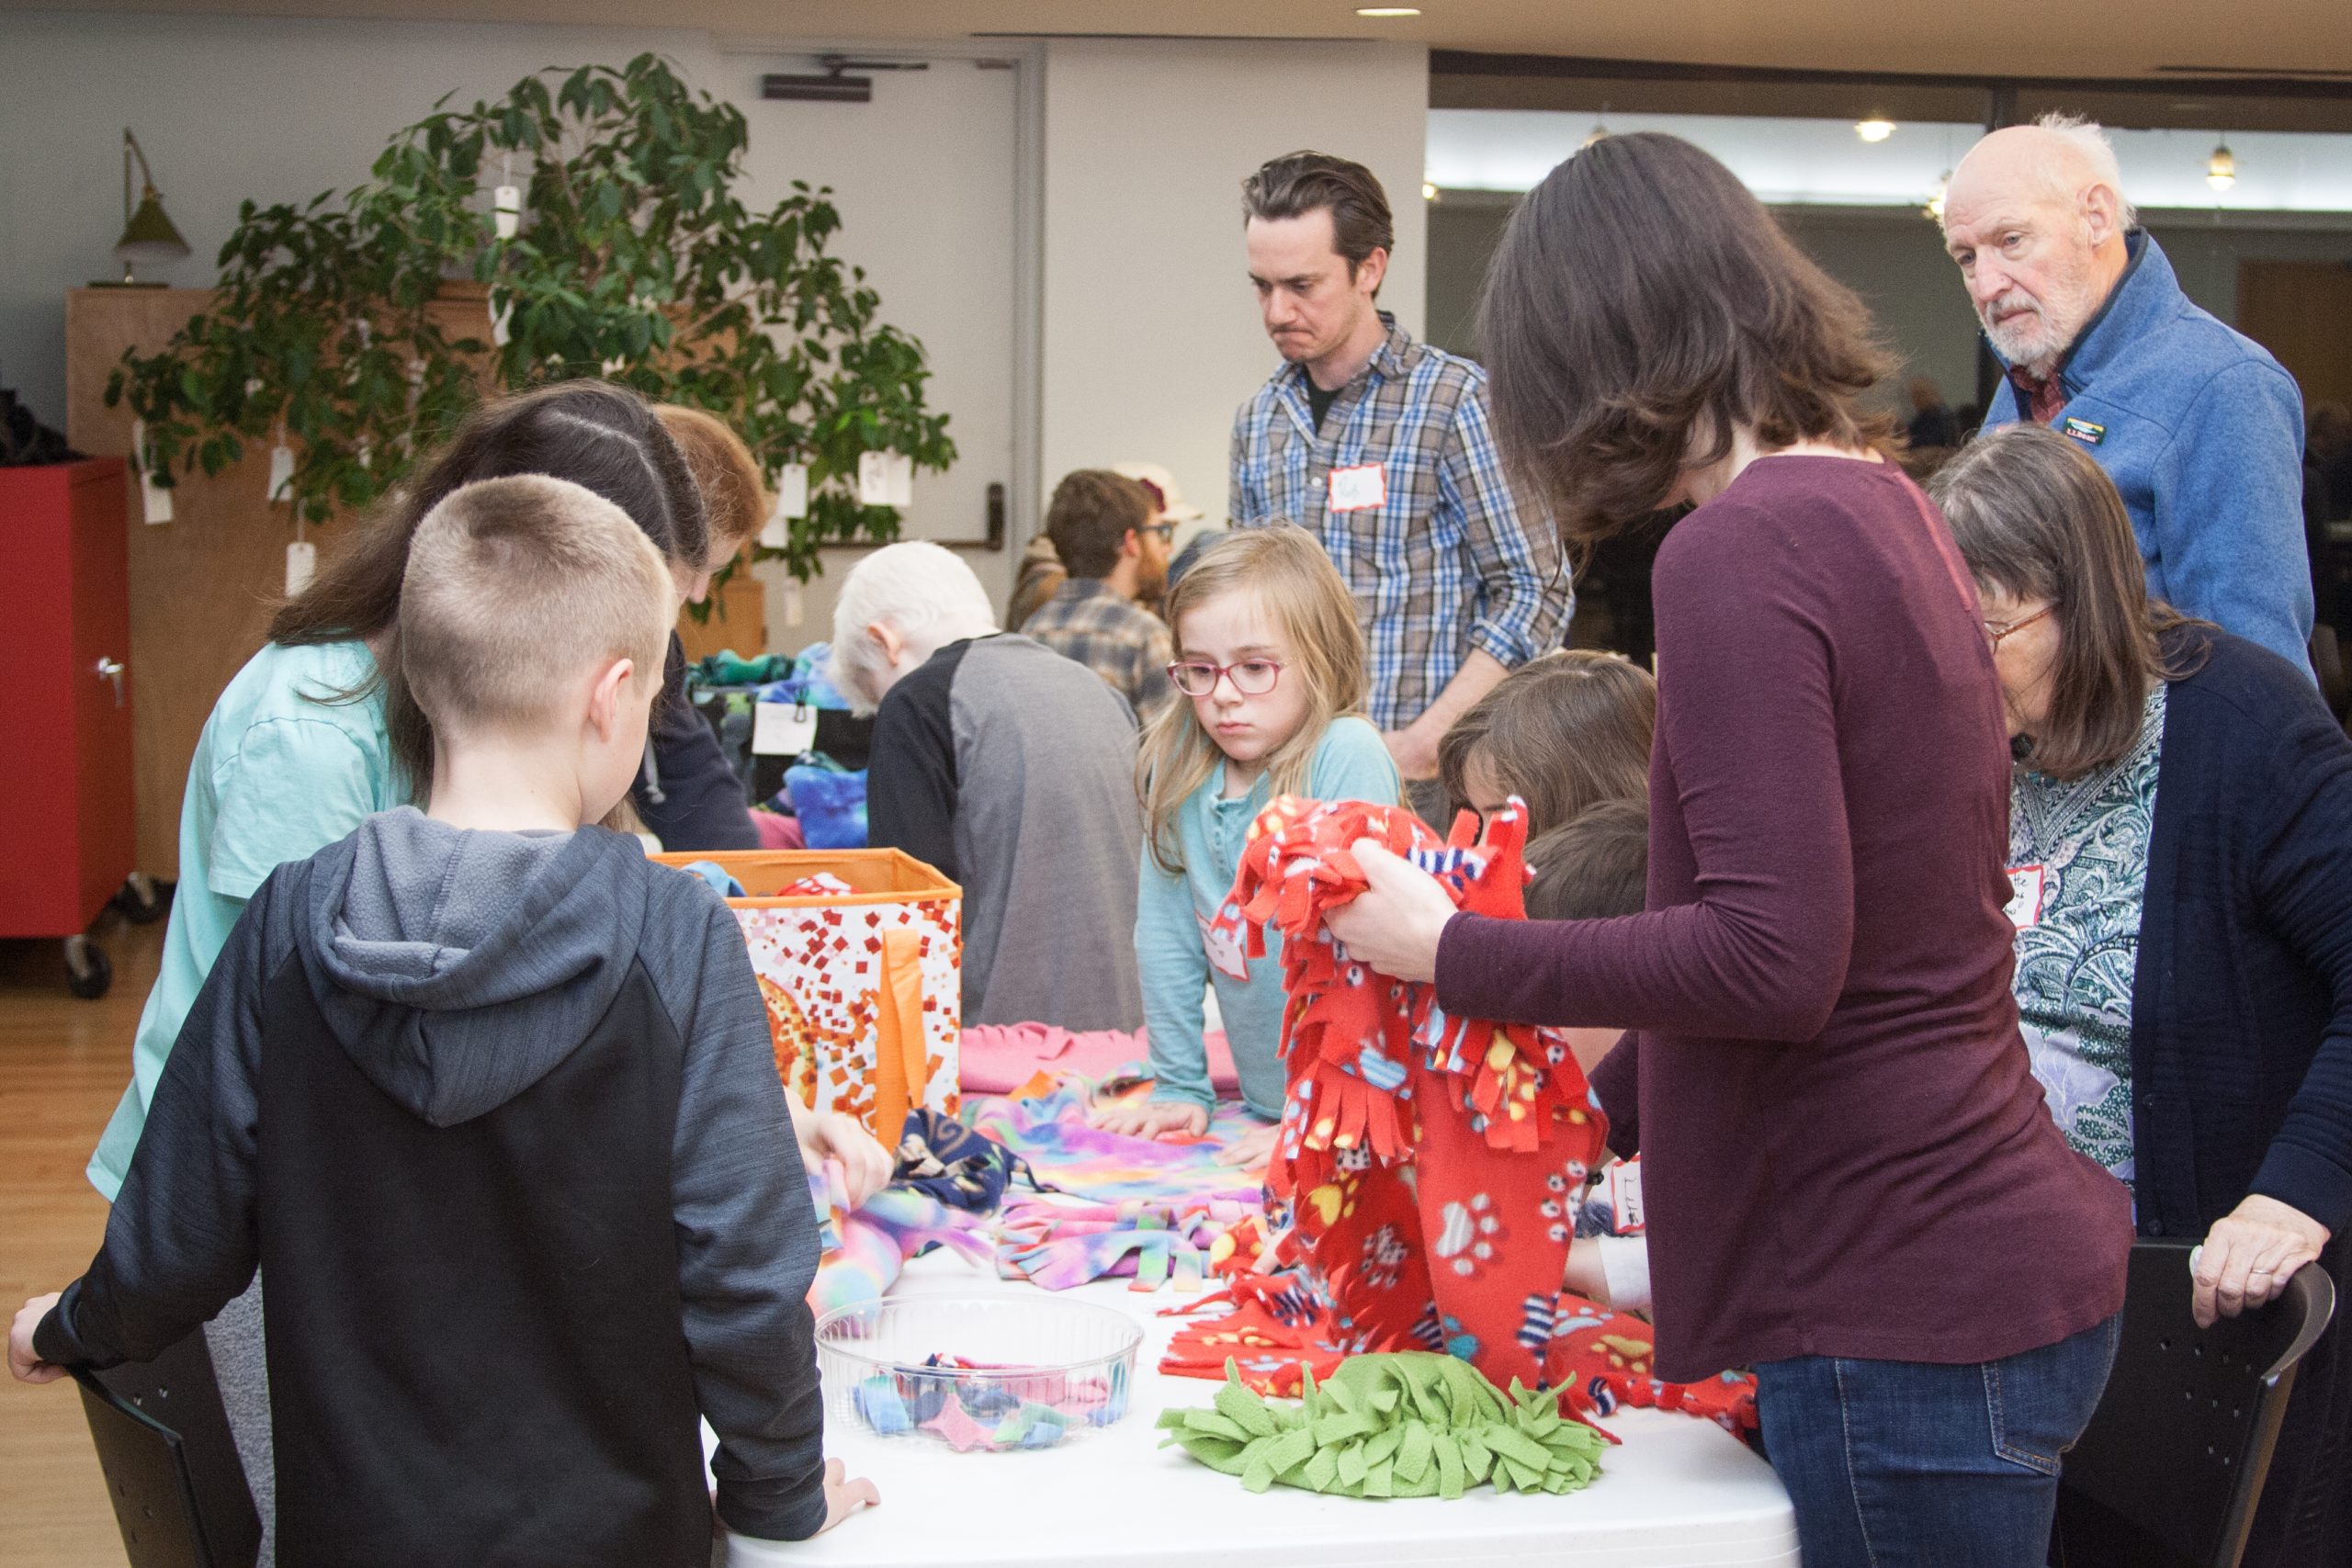 Several children and adults gather around a table learning how to make fleece hats.